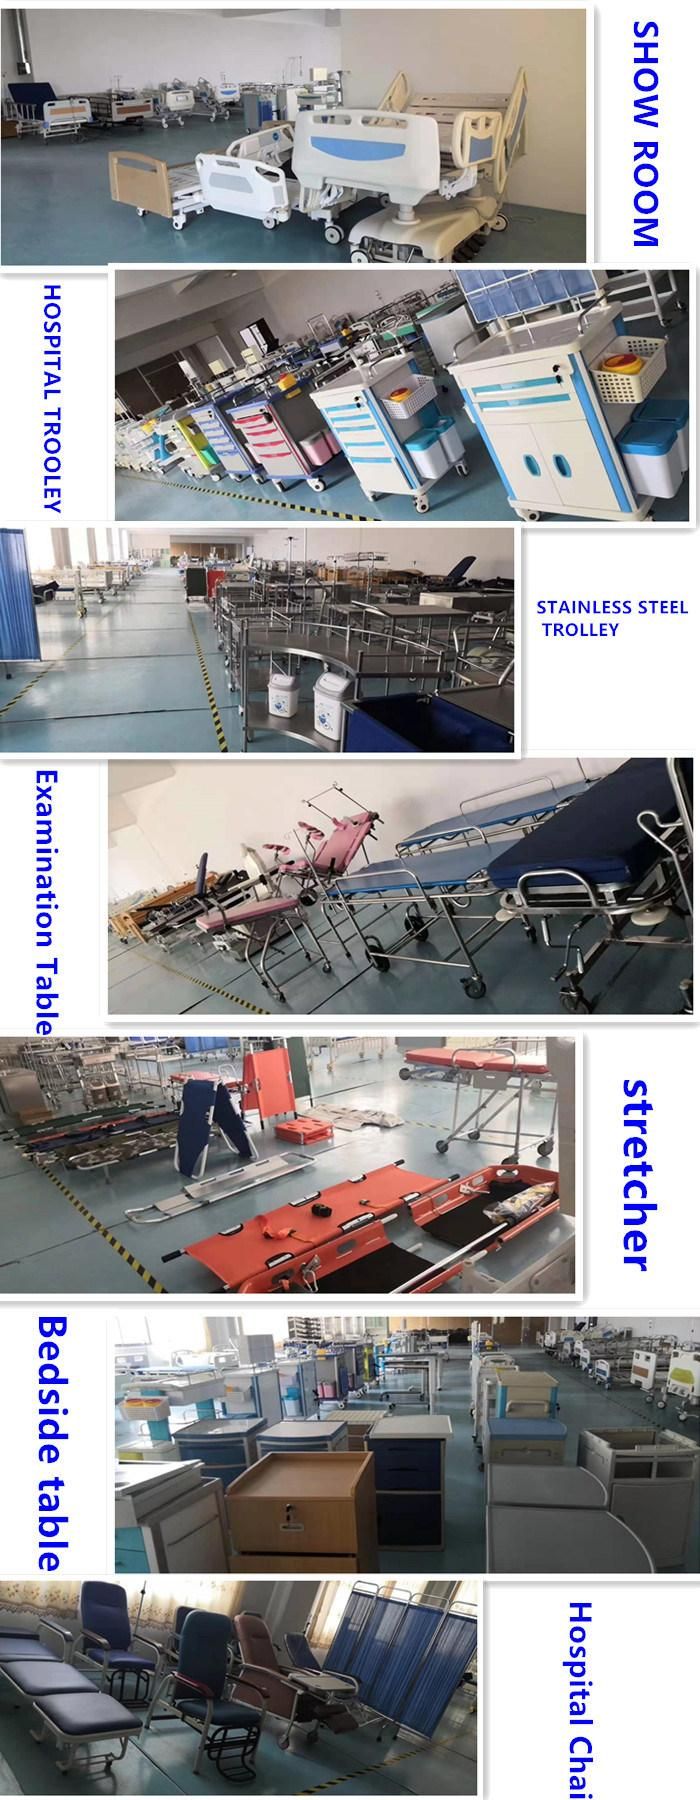 ABS Medicine Delivery Trolley Hospital Use Treatment Trolley Anesthesia Trolley